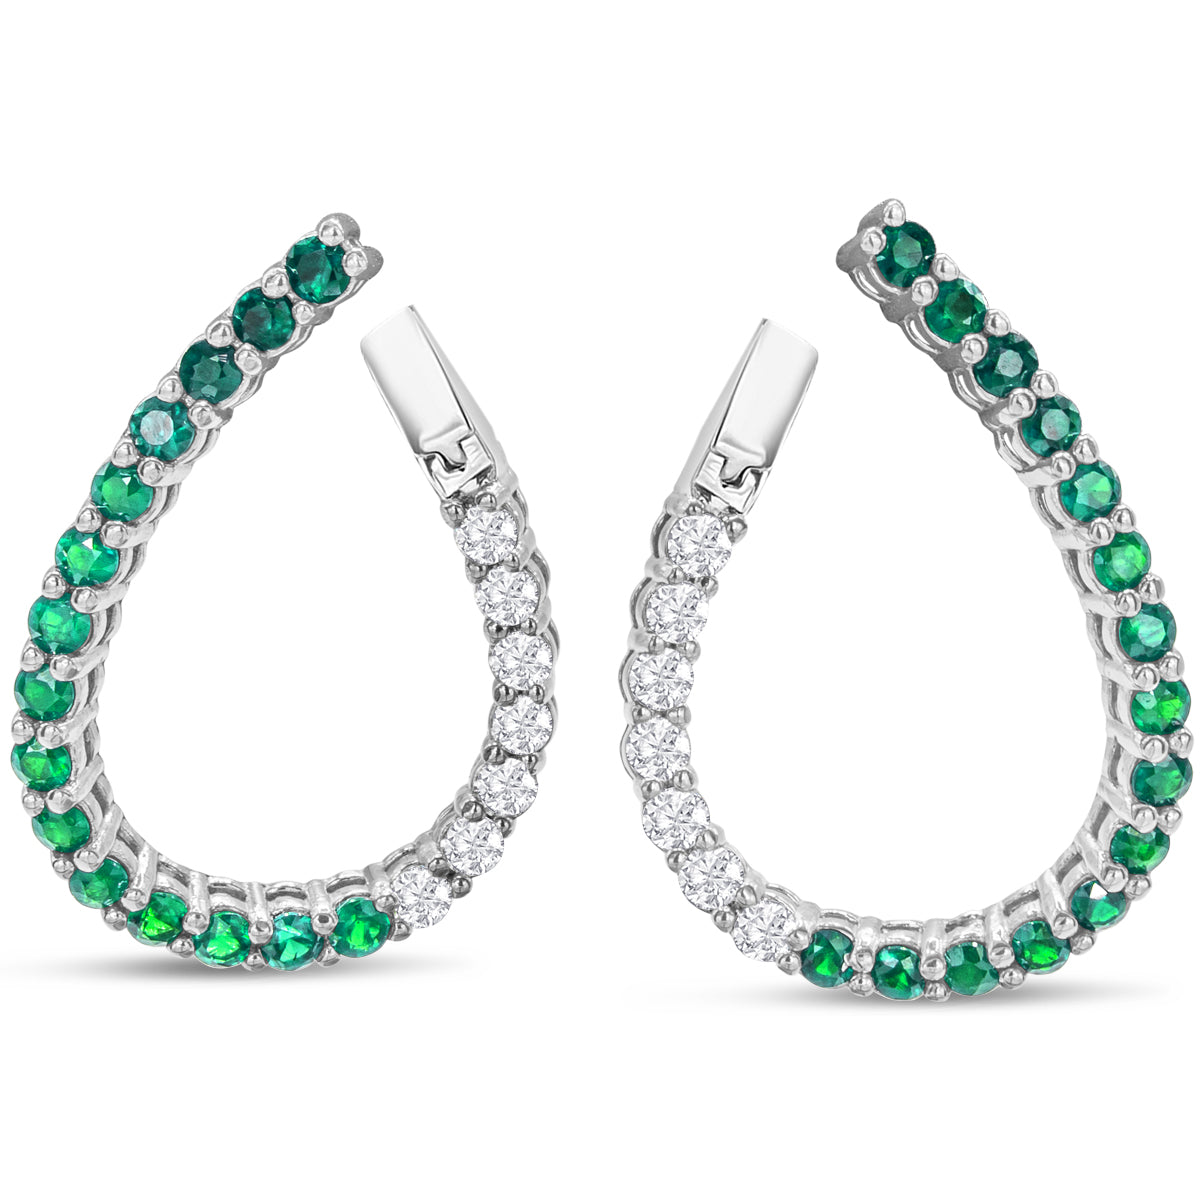 Sselects 2 1/2 Carat Front-back Emerald And Diamond Hoop Earrings In 14 Karat White I-j, I1-i2 In Gold